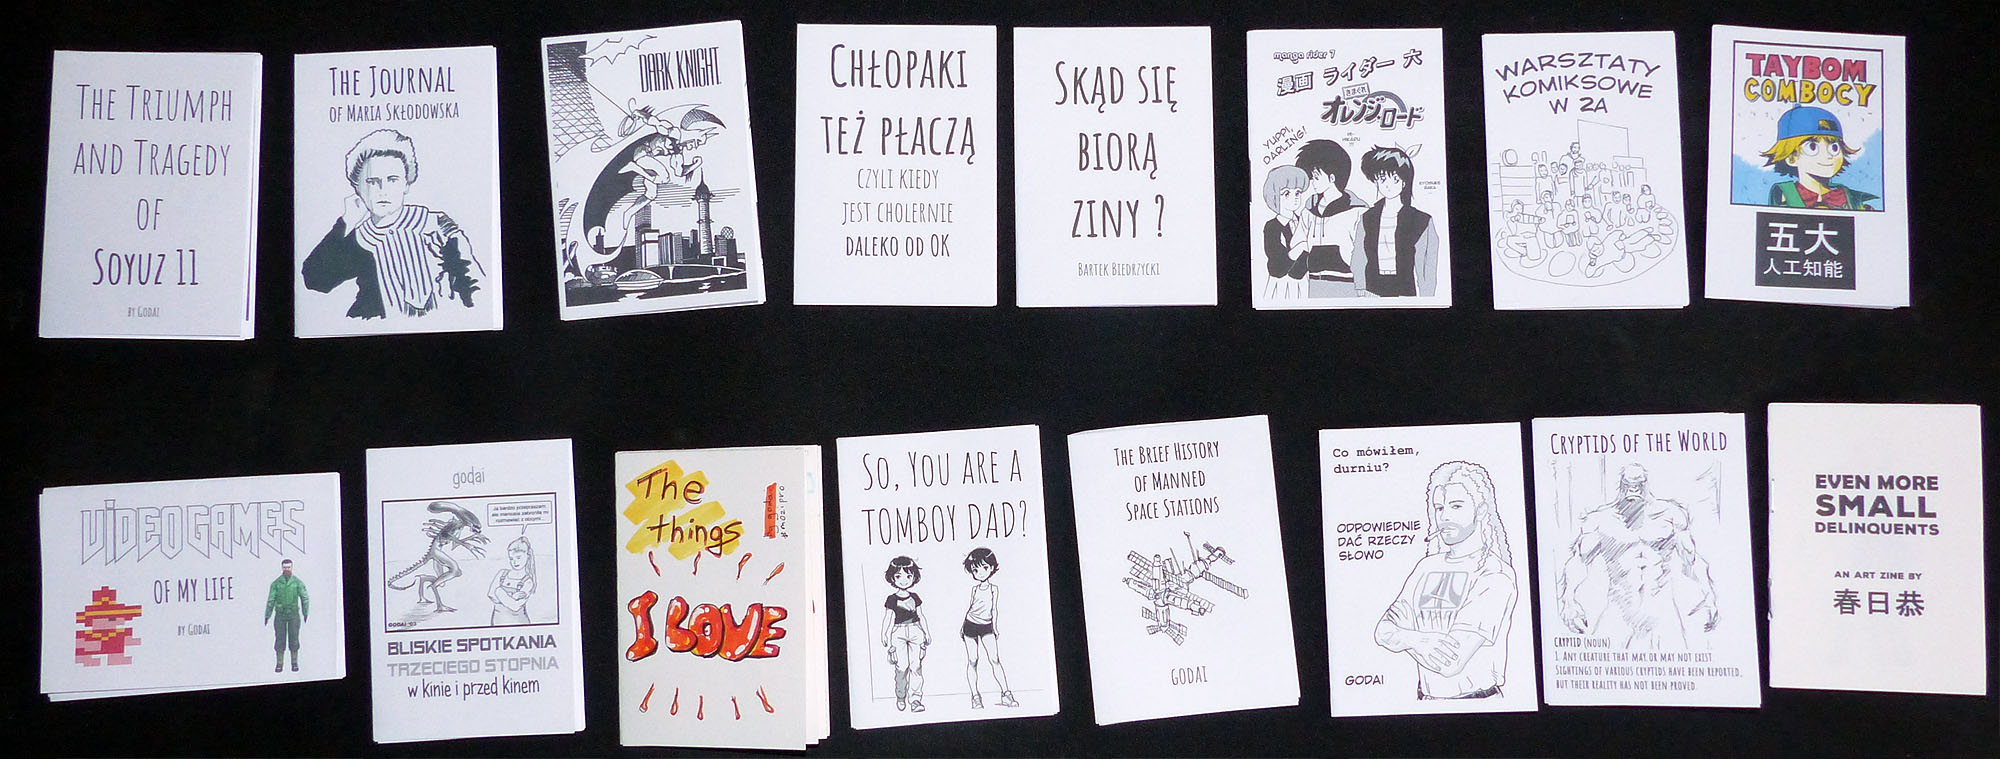 A bunch of DIY small folded zines about various topics, spread out on a desk.